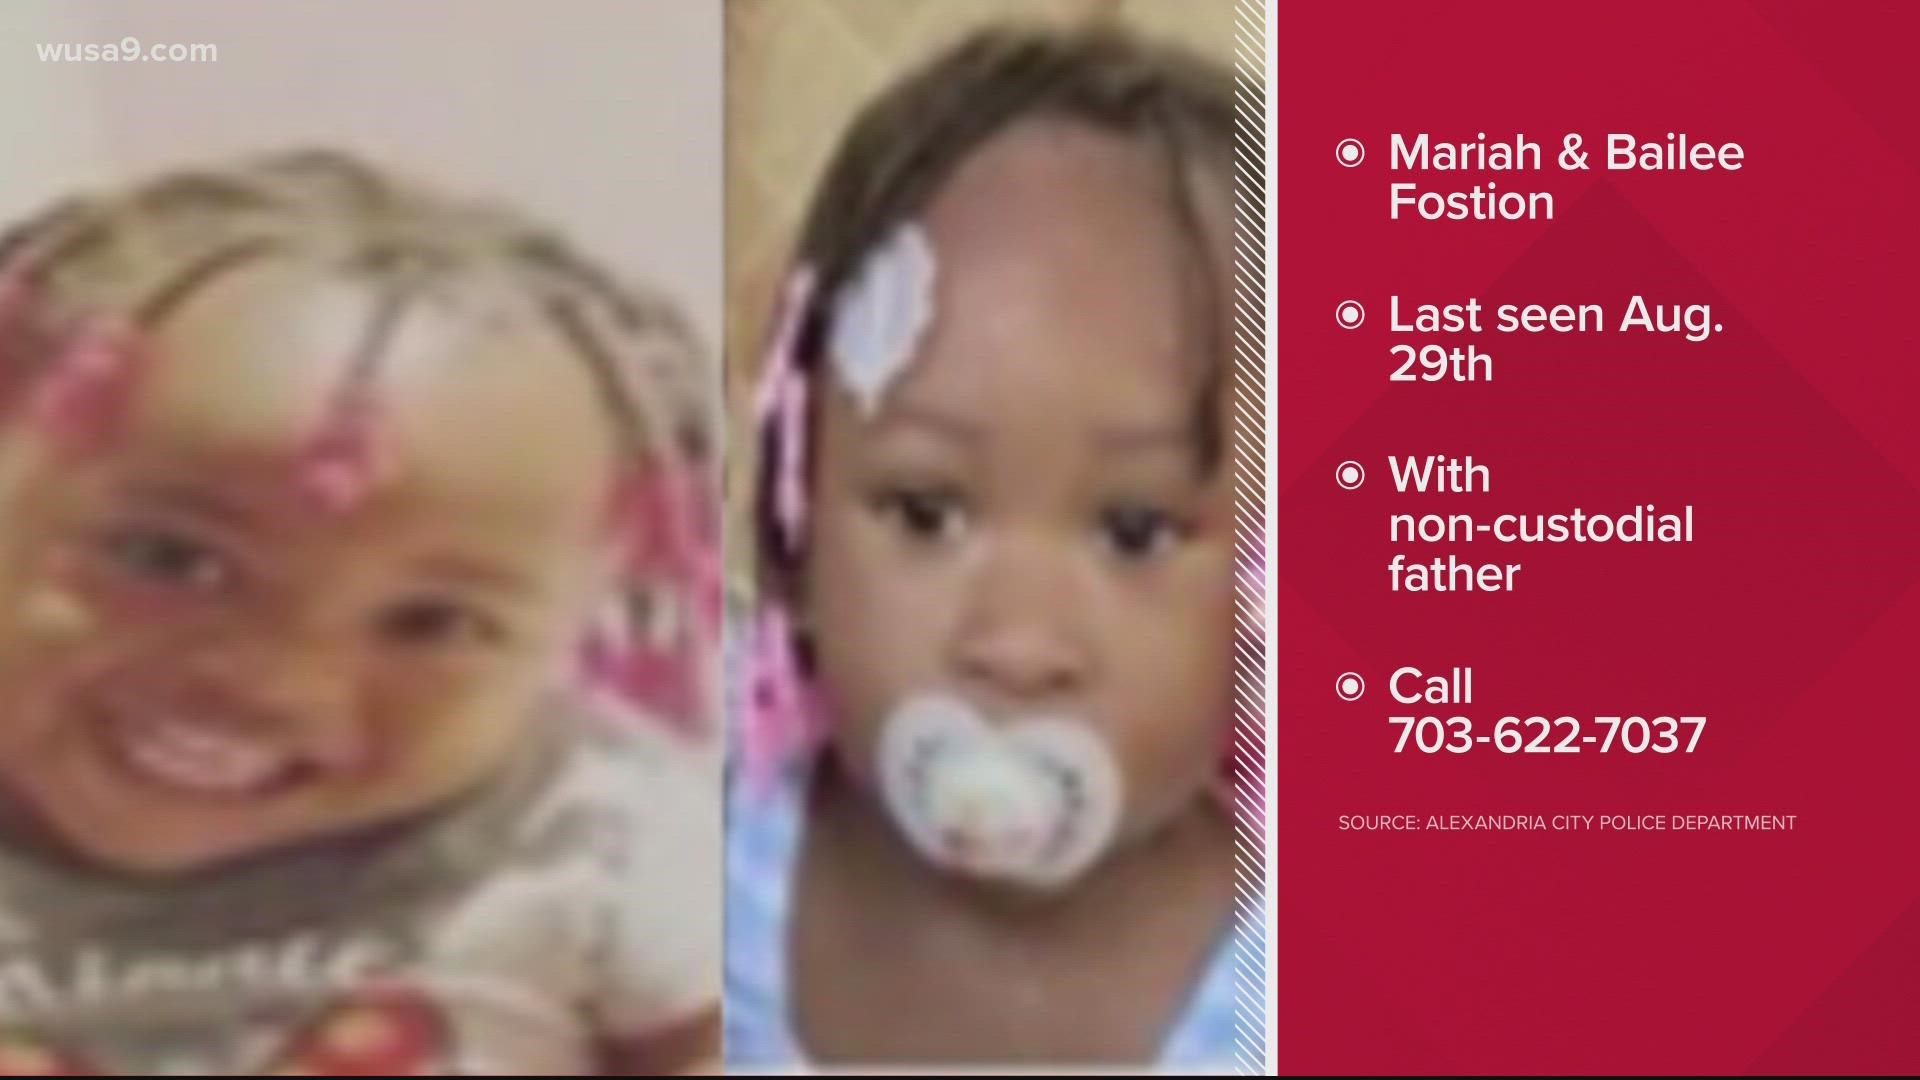 The 2-year-old girls were last seen on August 29, according to police.